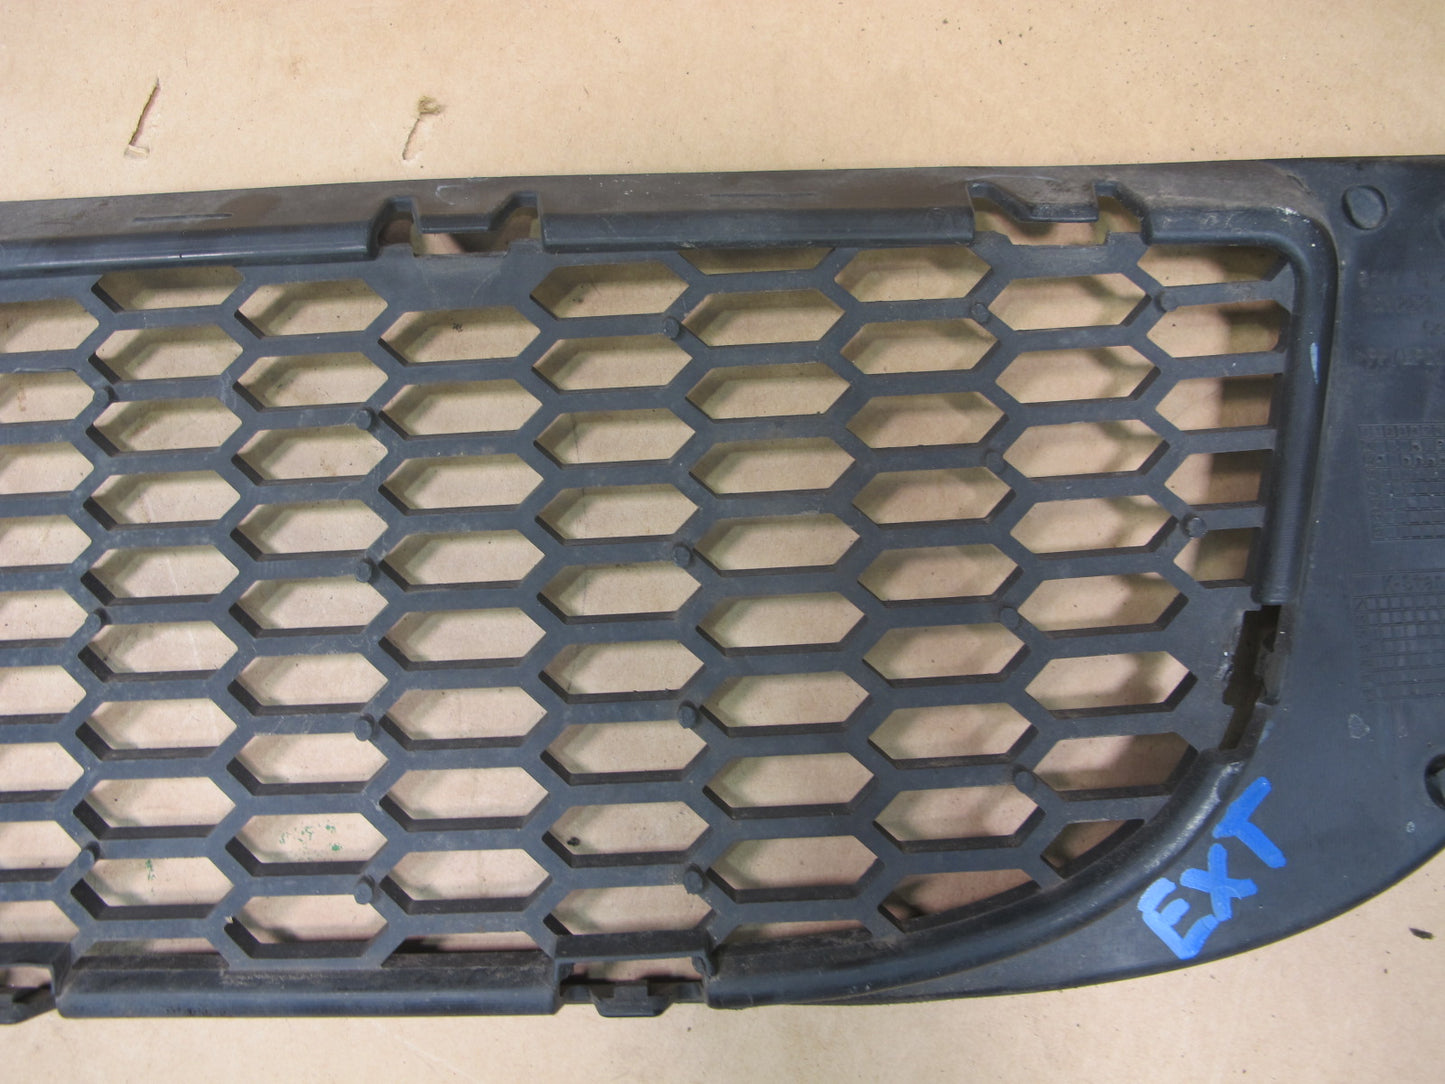 07-10 BMW E83 X3 FRONT LOWER BUMPER GRILLE 3417722 OEM